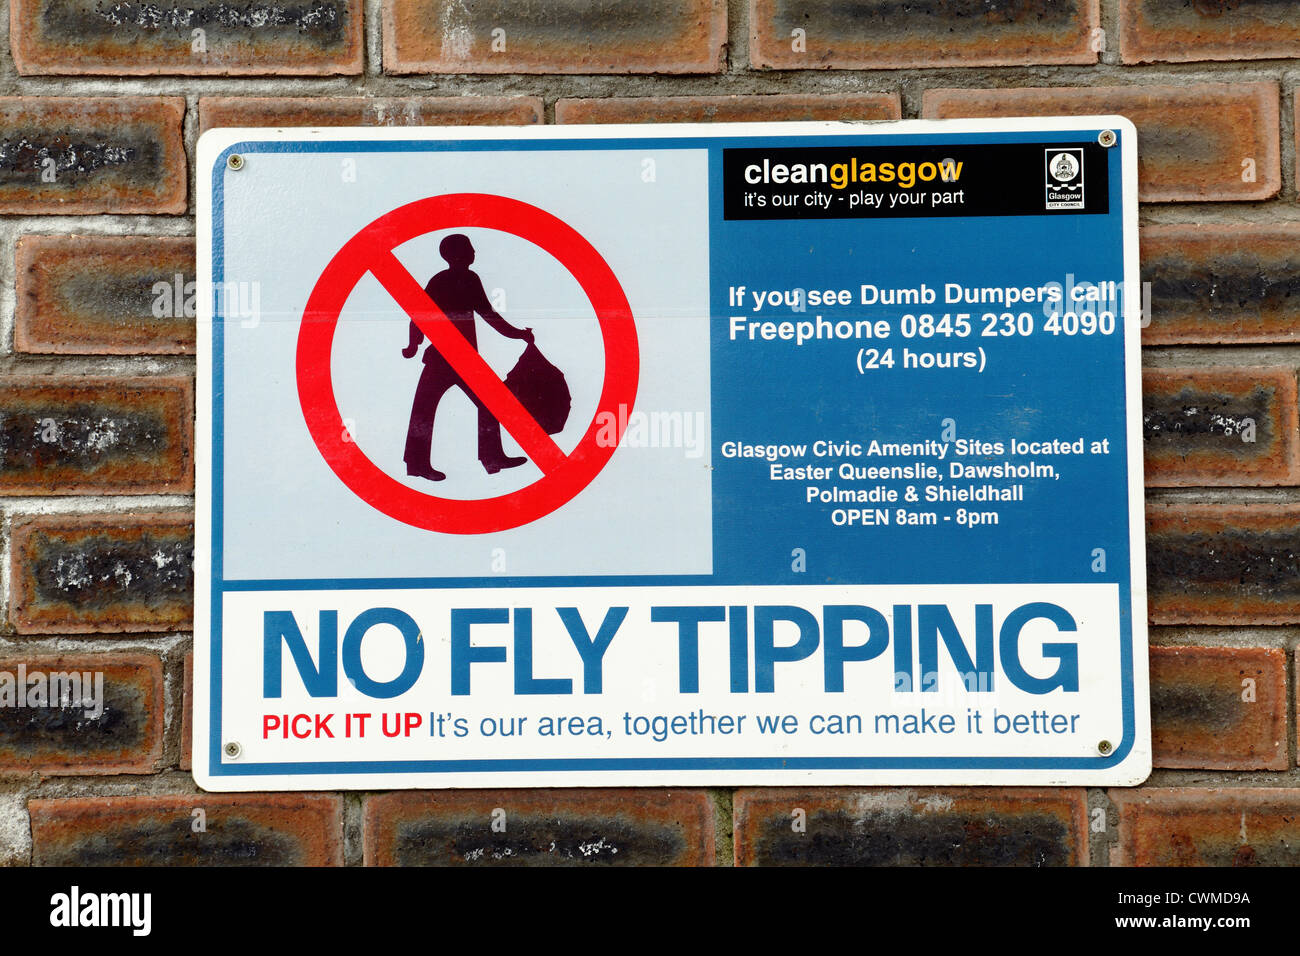 A No Fly Tipping sign in the West End of Glasgow, Scotland, UK Stock Photo